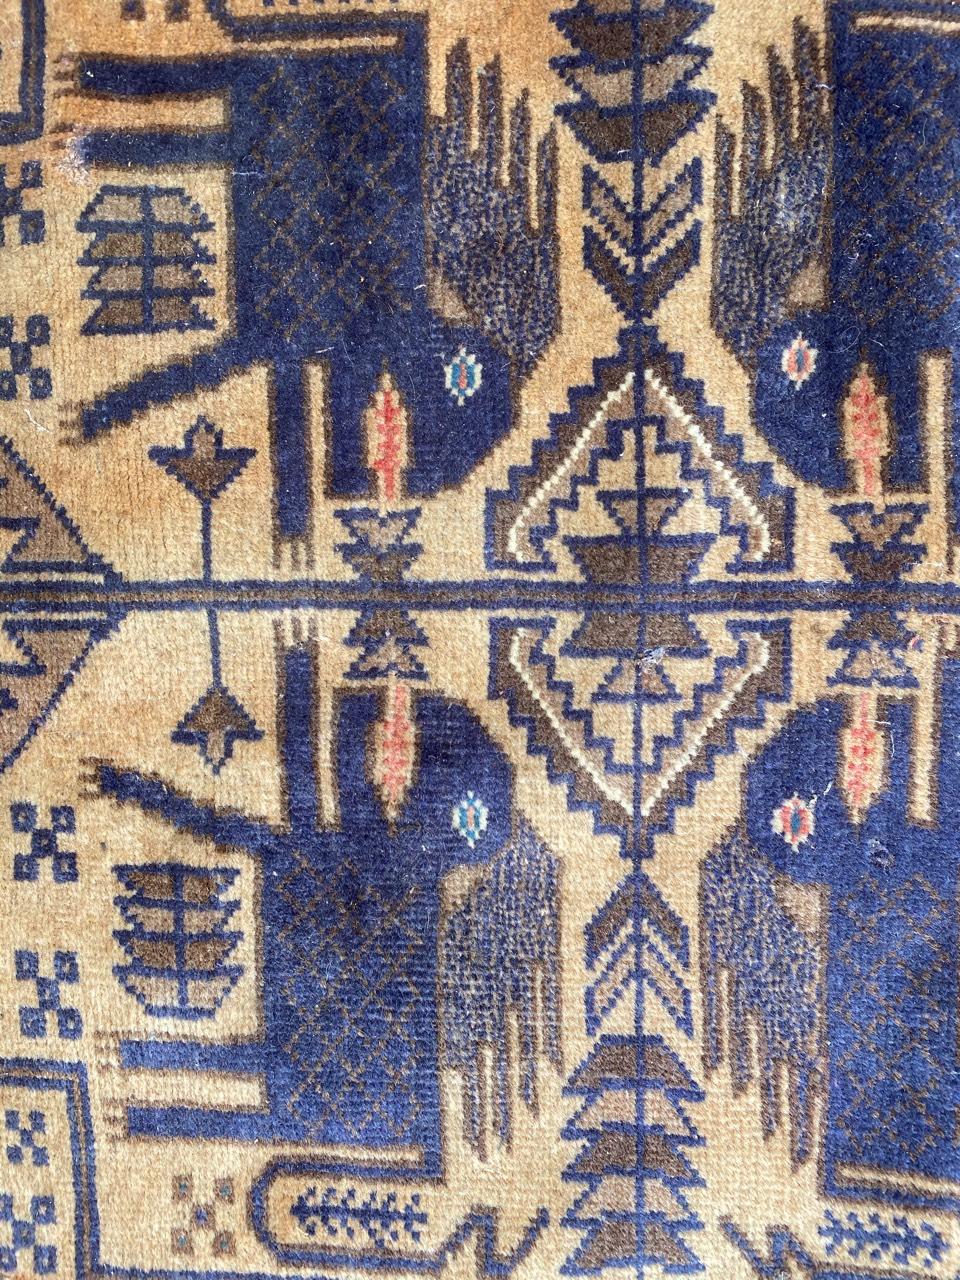 Beautiful vintage Afghan Belutch rug with a tribal design and blue, green and yellow colors, entirely hand knotted with wool velvet on wool foundation.